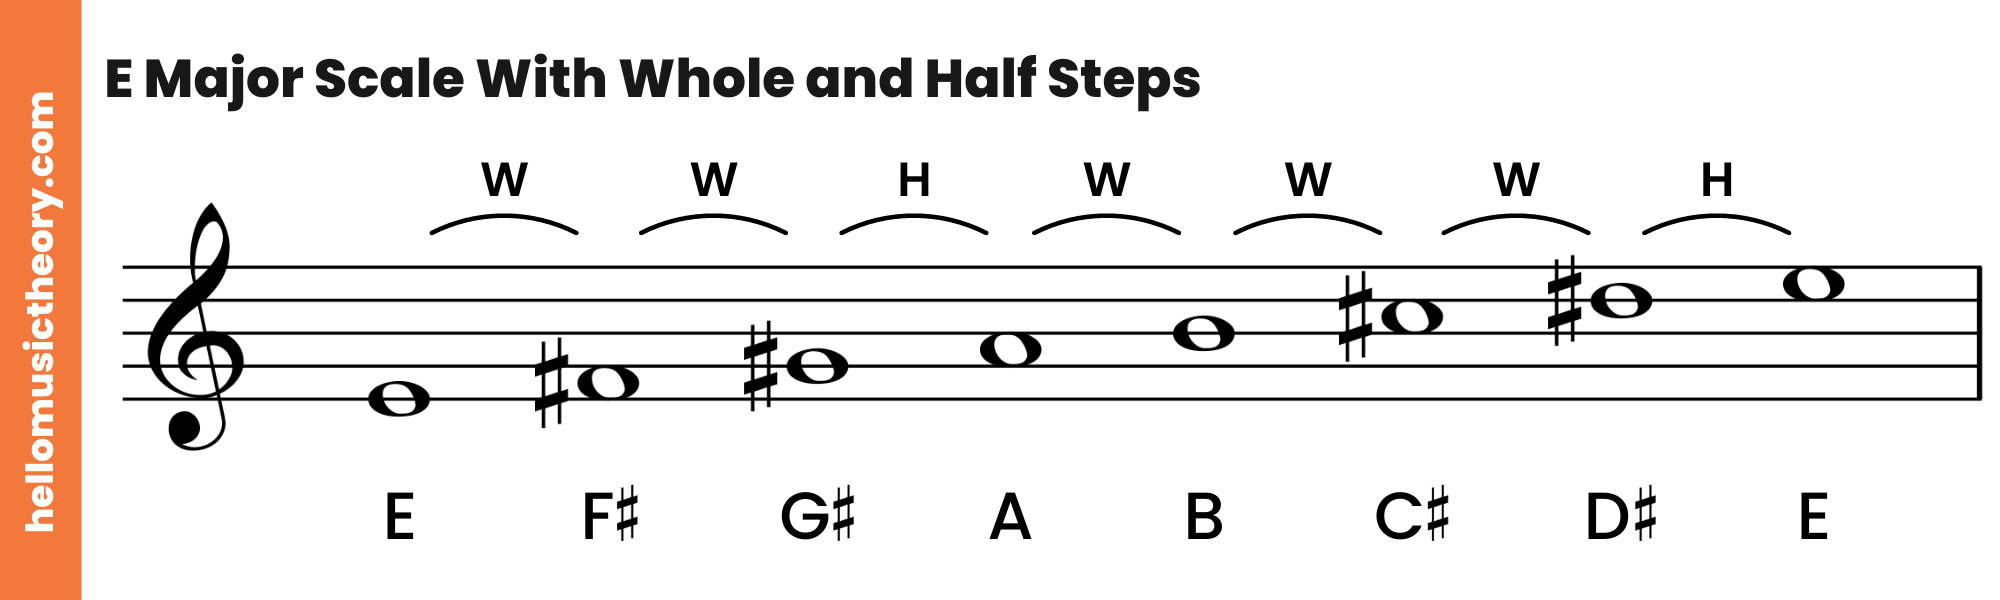 E Major Scale Treble Clef With Whole and Half Steps